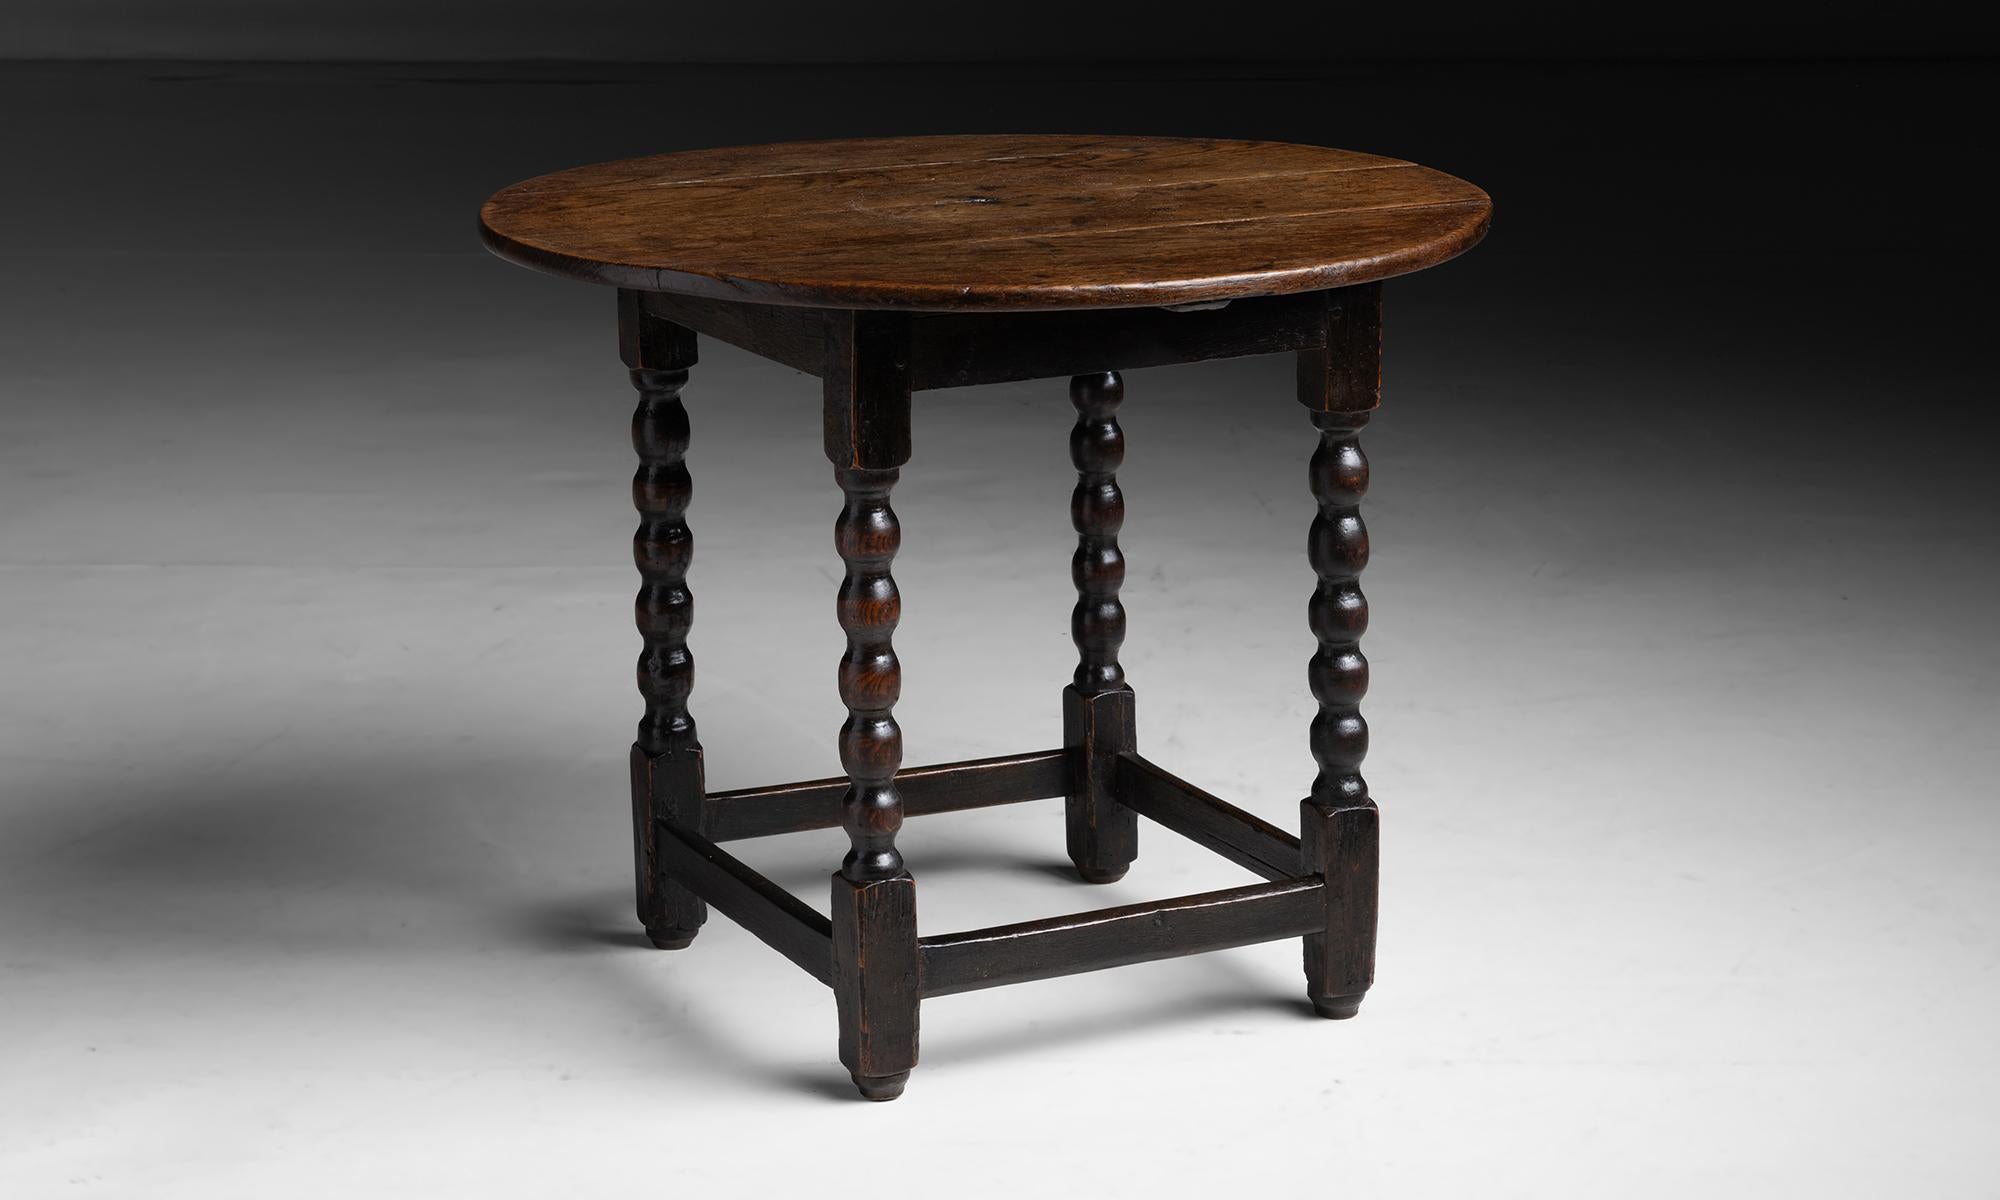 Oak Tavern Side Table

England circa 1790

Circular top with bobbin turned legs, constructed in oak.

Measures 29.75”dia x 24”h